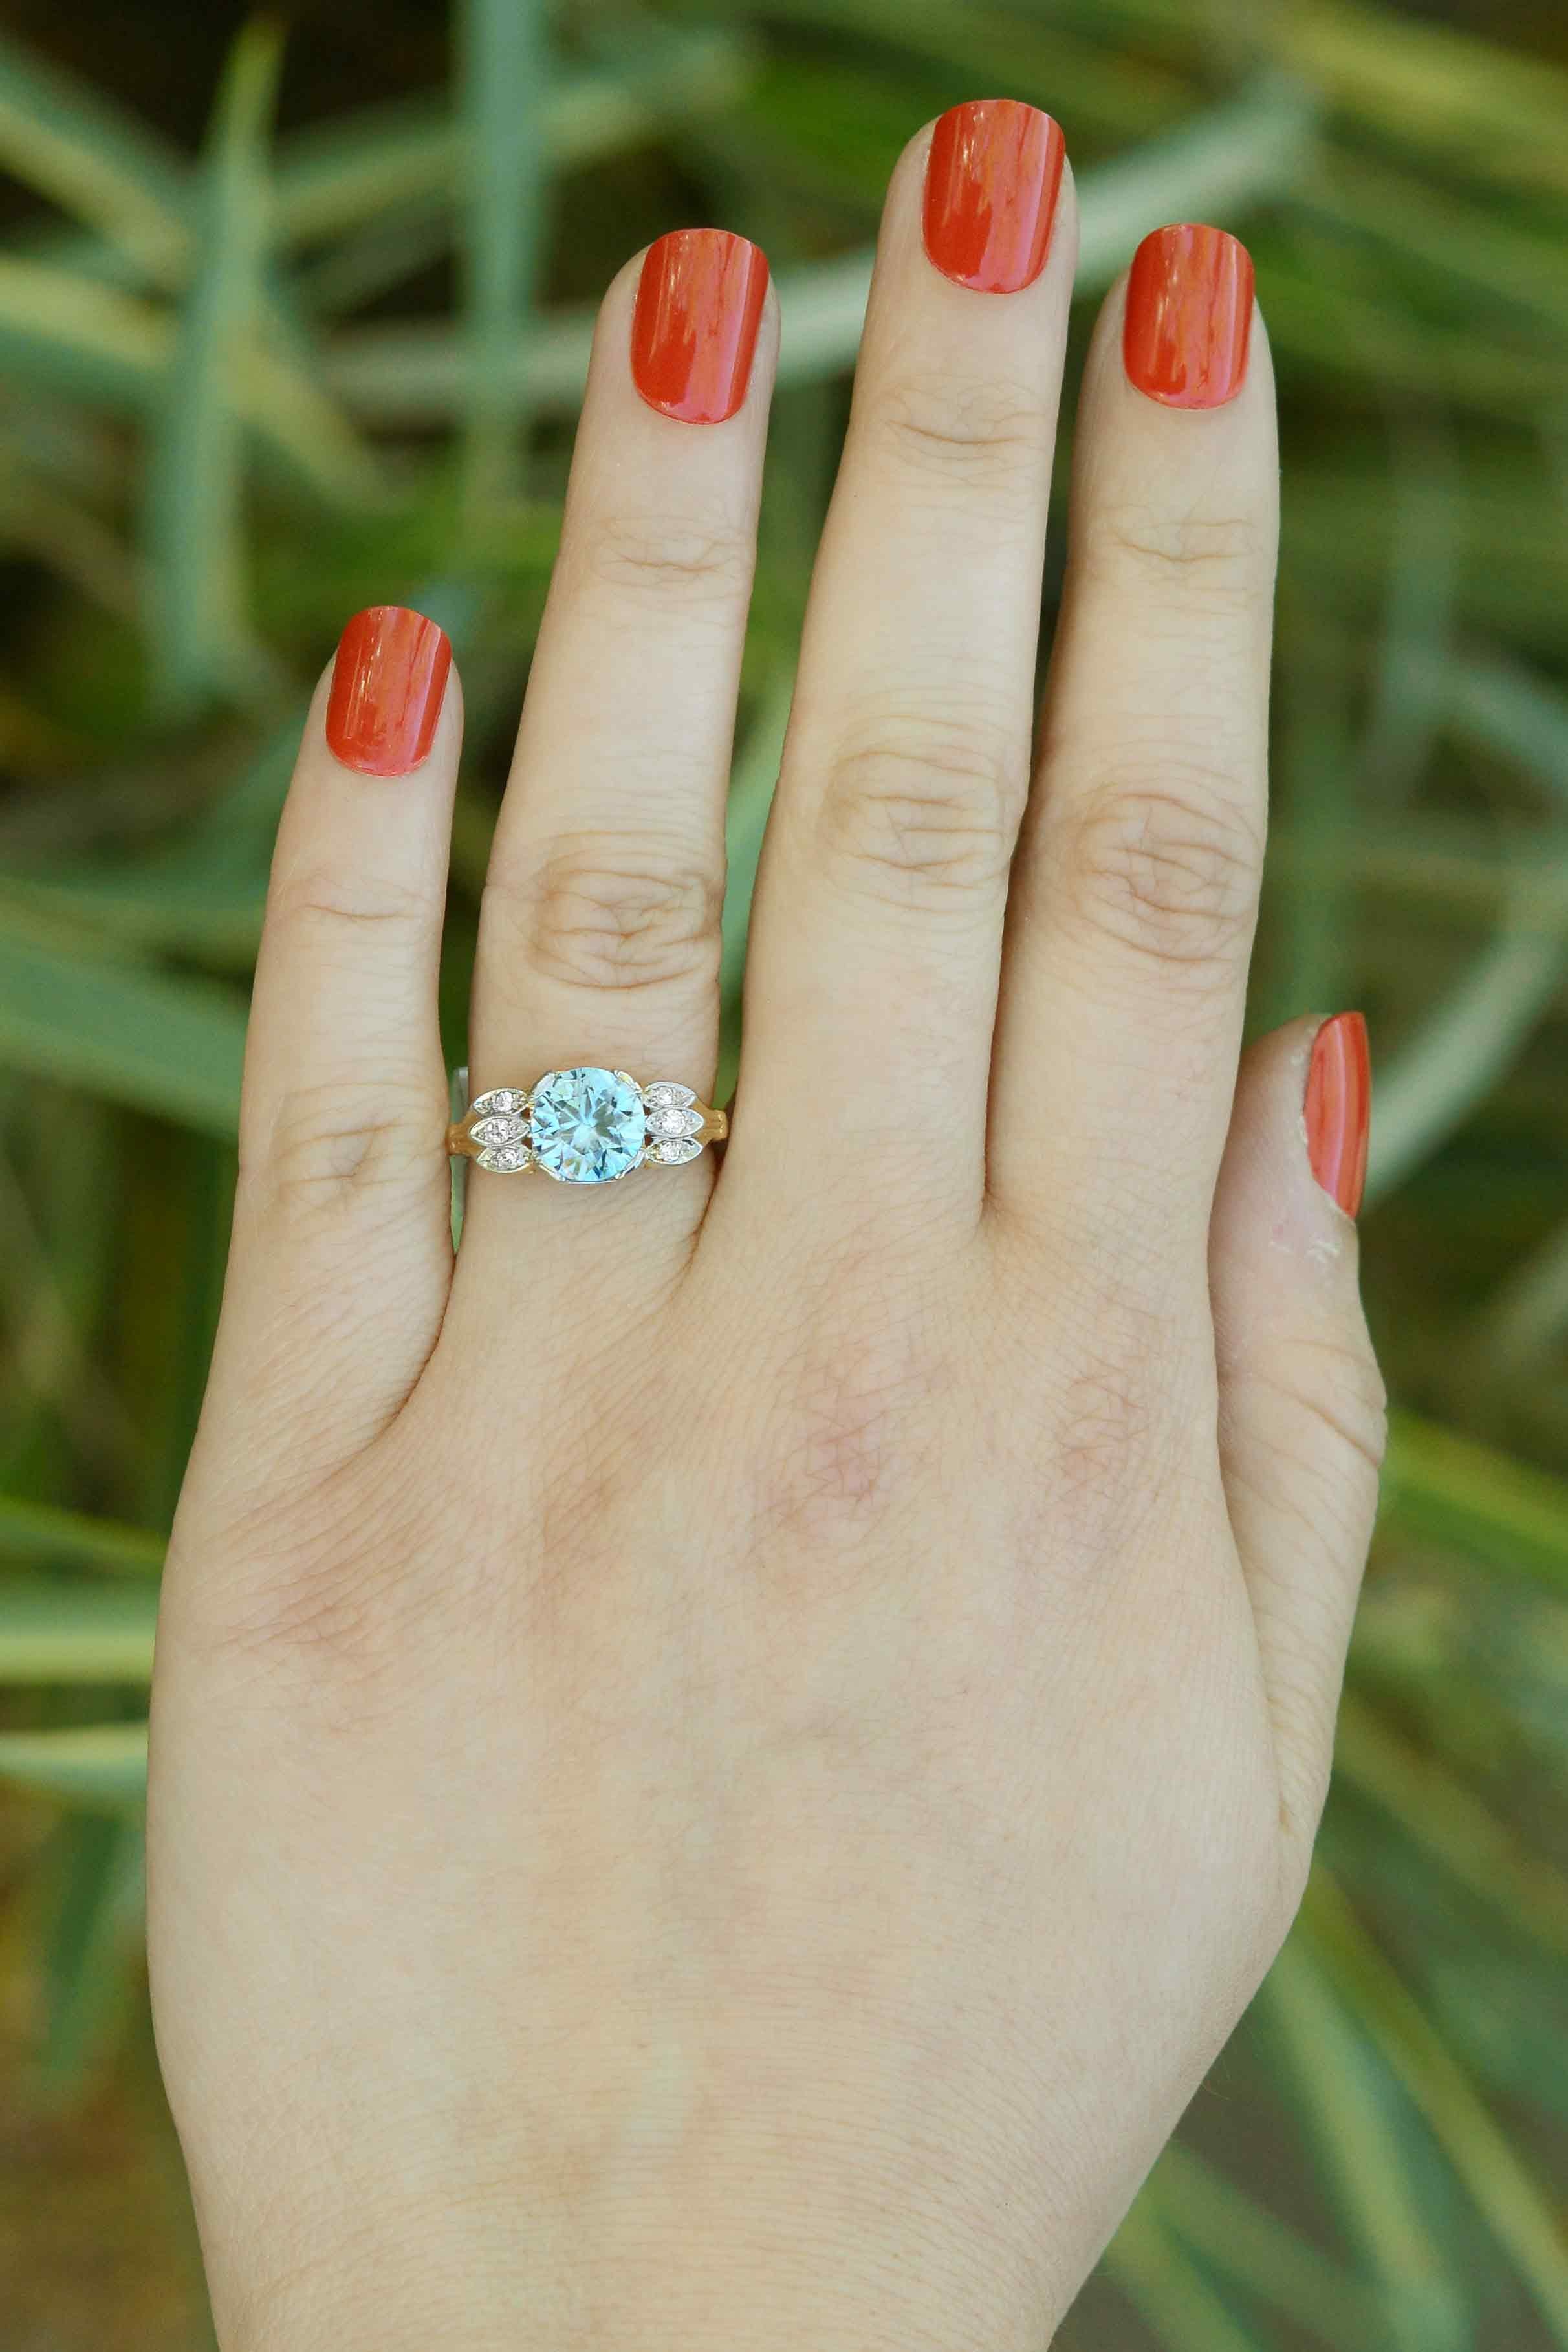 The Shelburne Art Deco blue zircon and diamond engagement ring centers on an electric, neon gem weighing 2.87 carats with diamond-kissed shoulders. With its vintage, 1940s Retro era vibe, this colored gemstone engagement ring will wow you with its